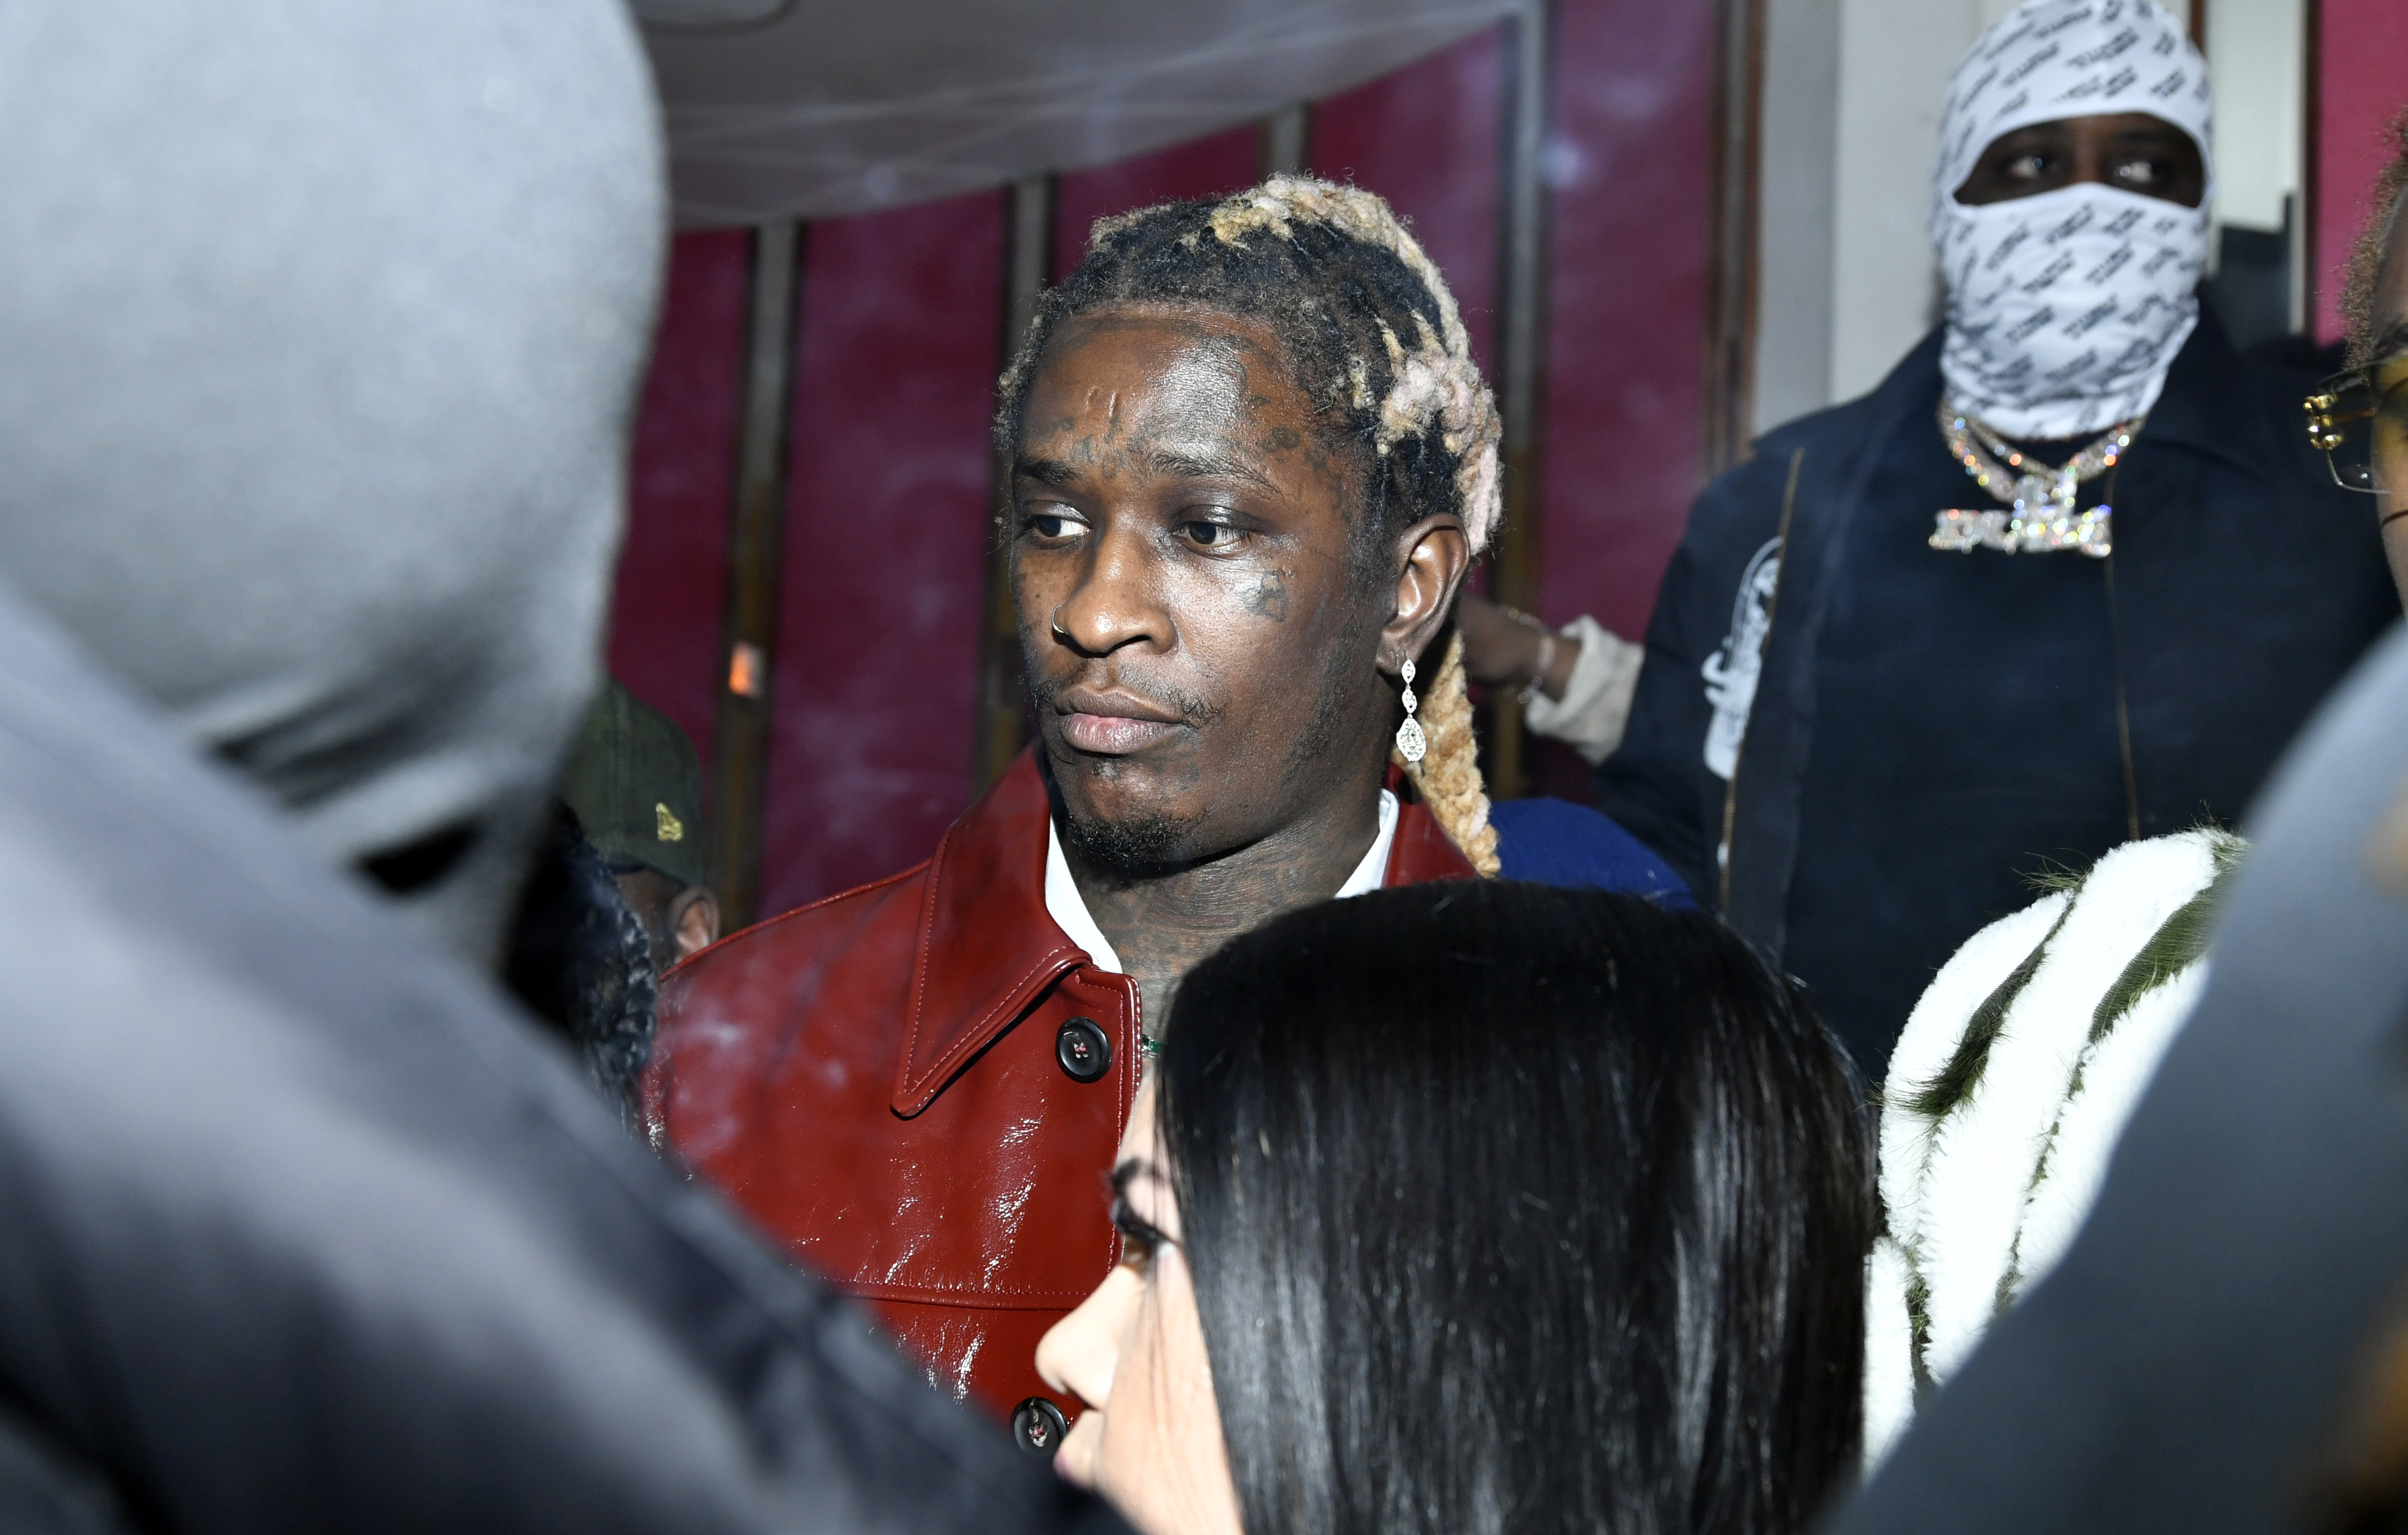 Young Thug Fans Fall Victim To Internet Rumor In Walmart Check Out